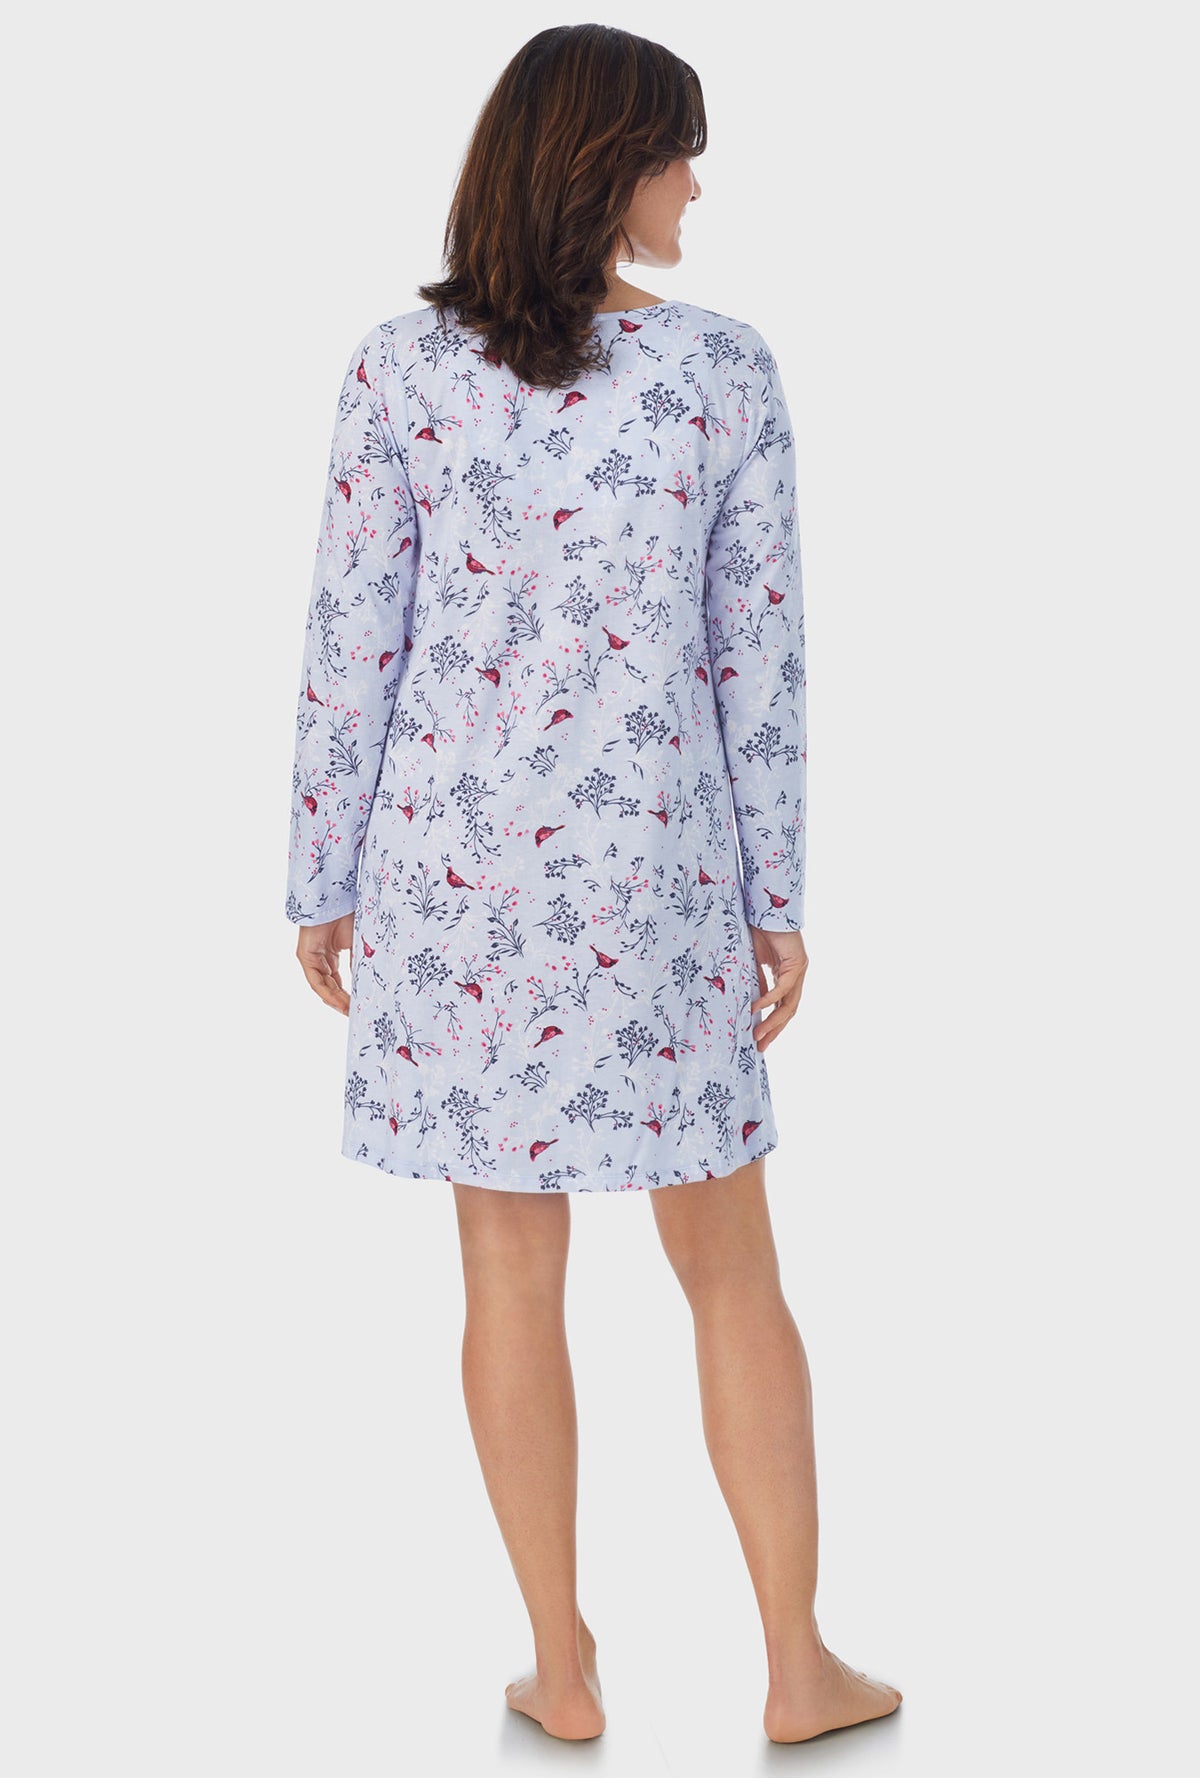 A lady wearing white Long Sleeve Nightgown with Winter Winter Blue print